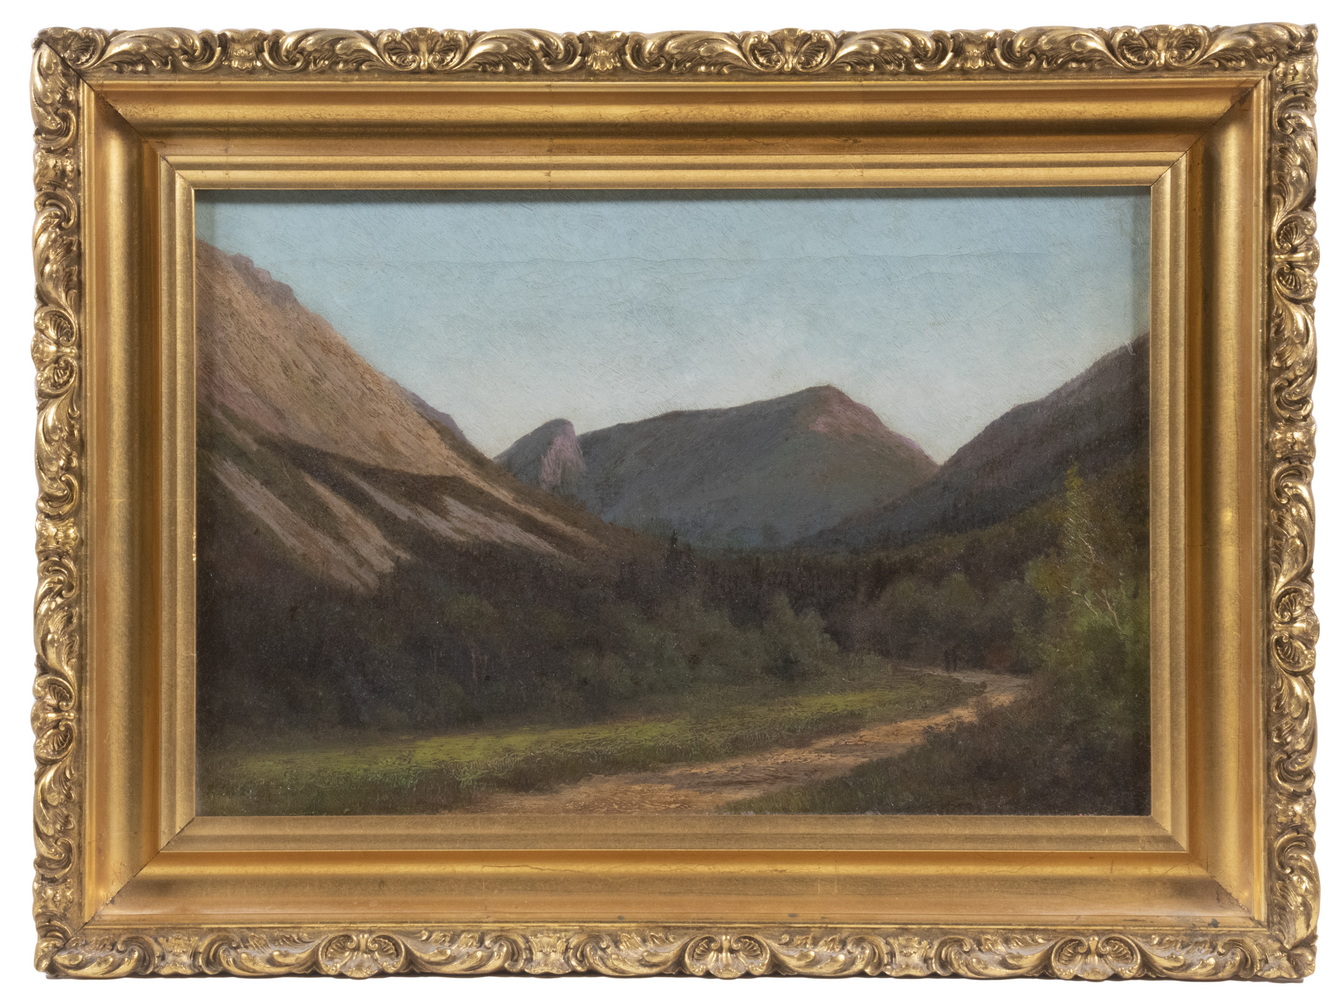 ATTRIBUTED TO EDWARD HILL NH CA OR  302a25